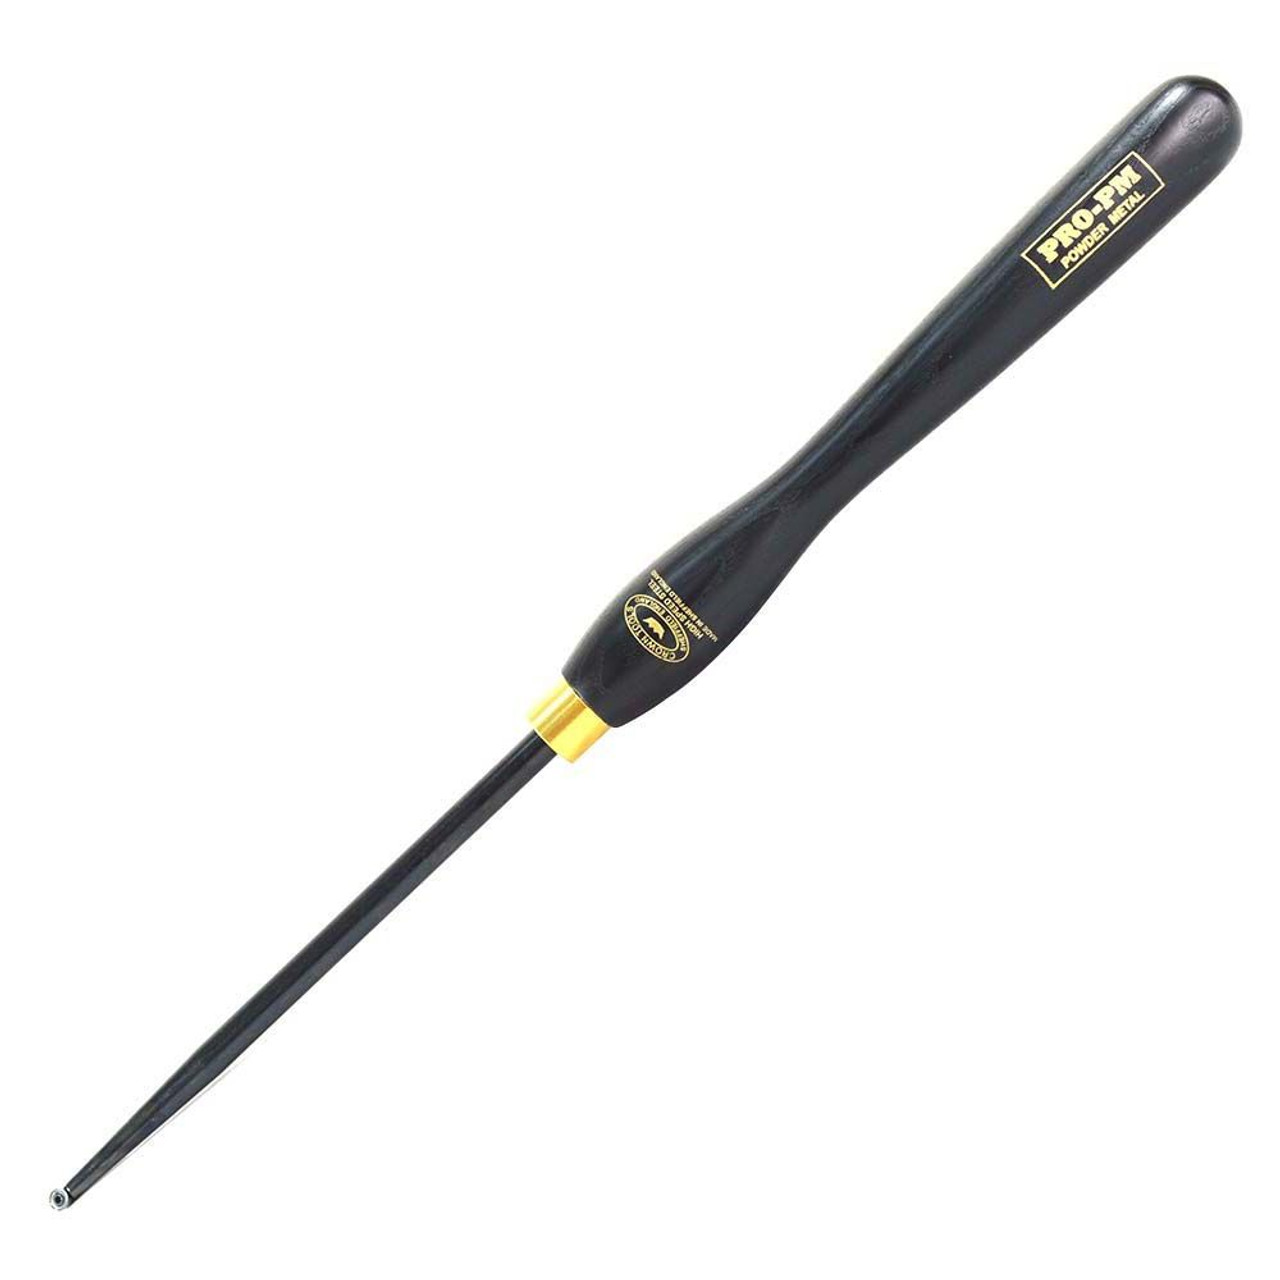 CROWN TOOLS CARB1H 1/2 INCH STRAIGHT TAPERED SHAFT WITH 8MM CUTTER AND TORX SCREW, 16 INCH HANDLE 25303